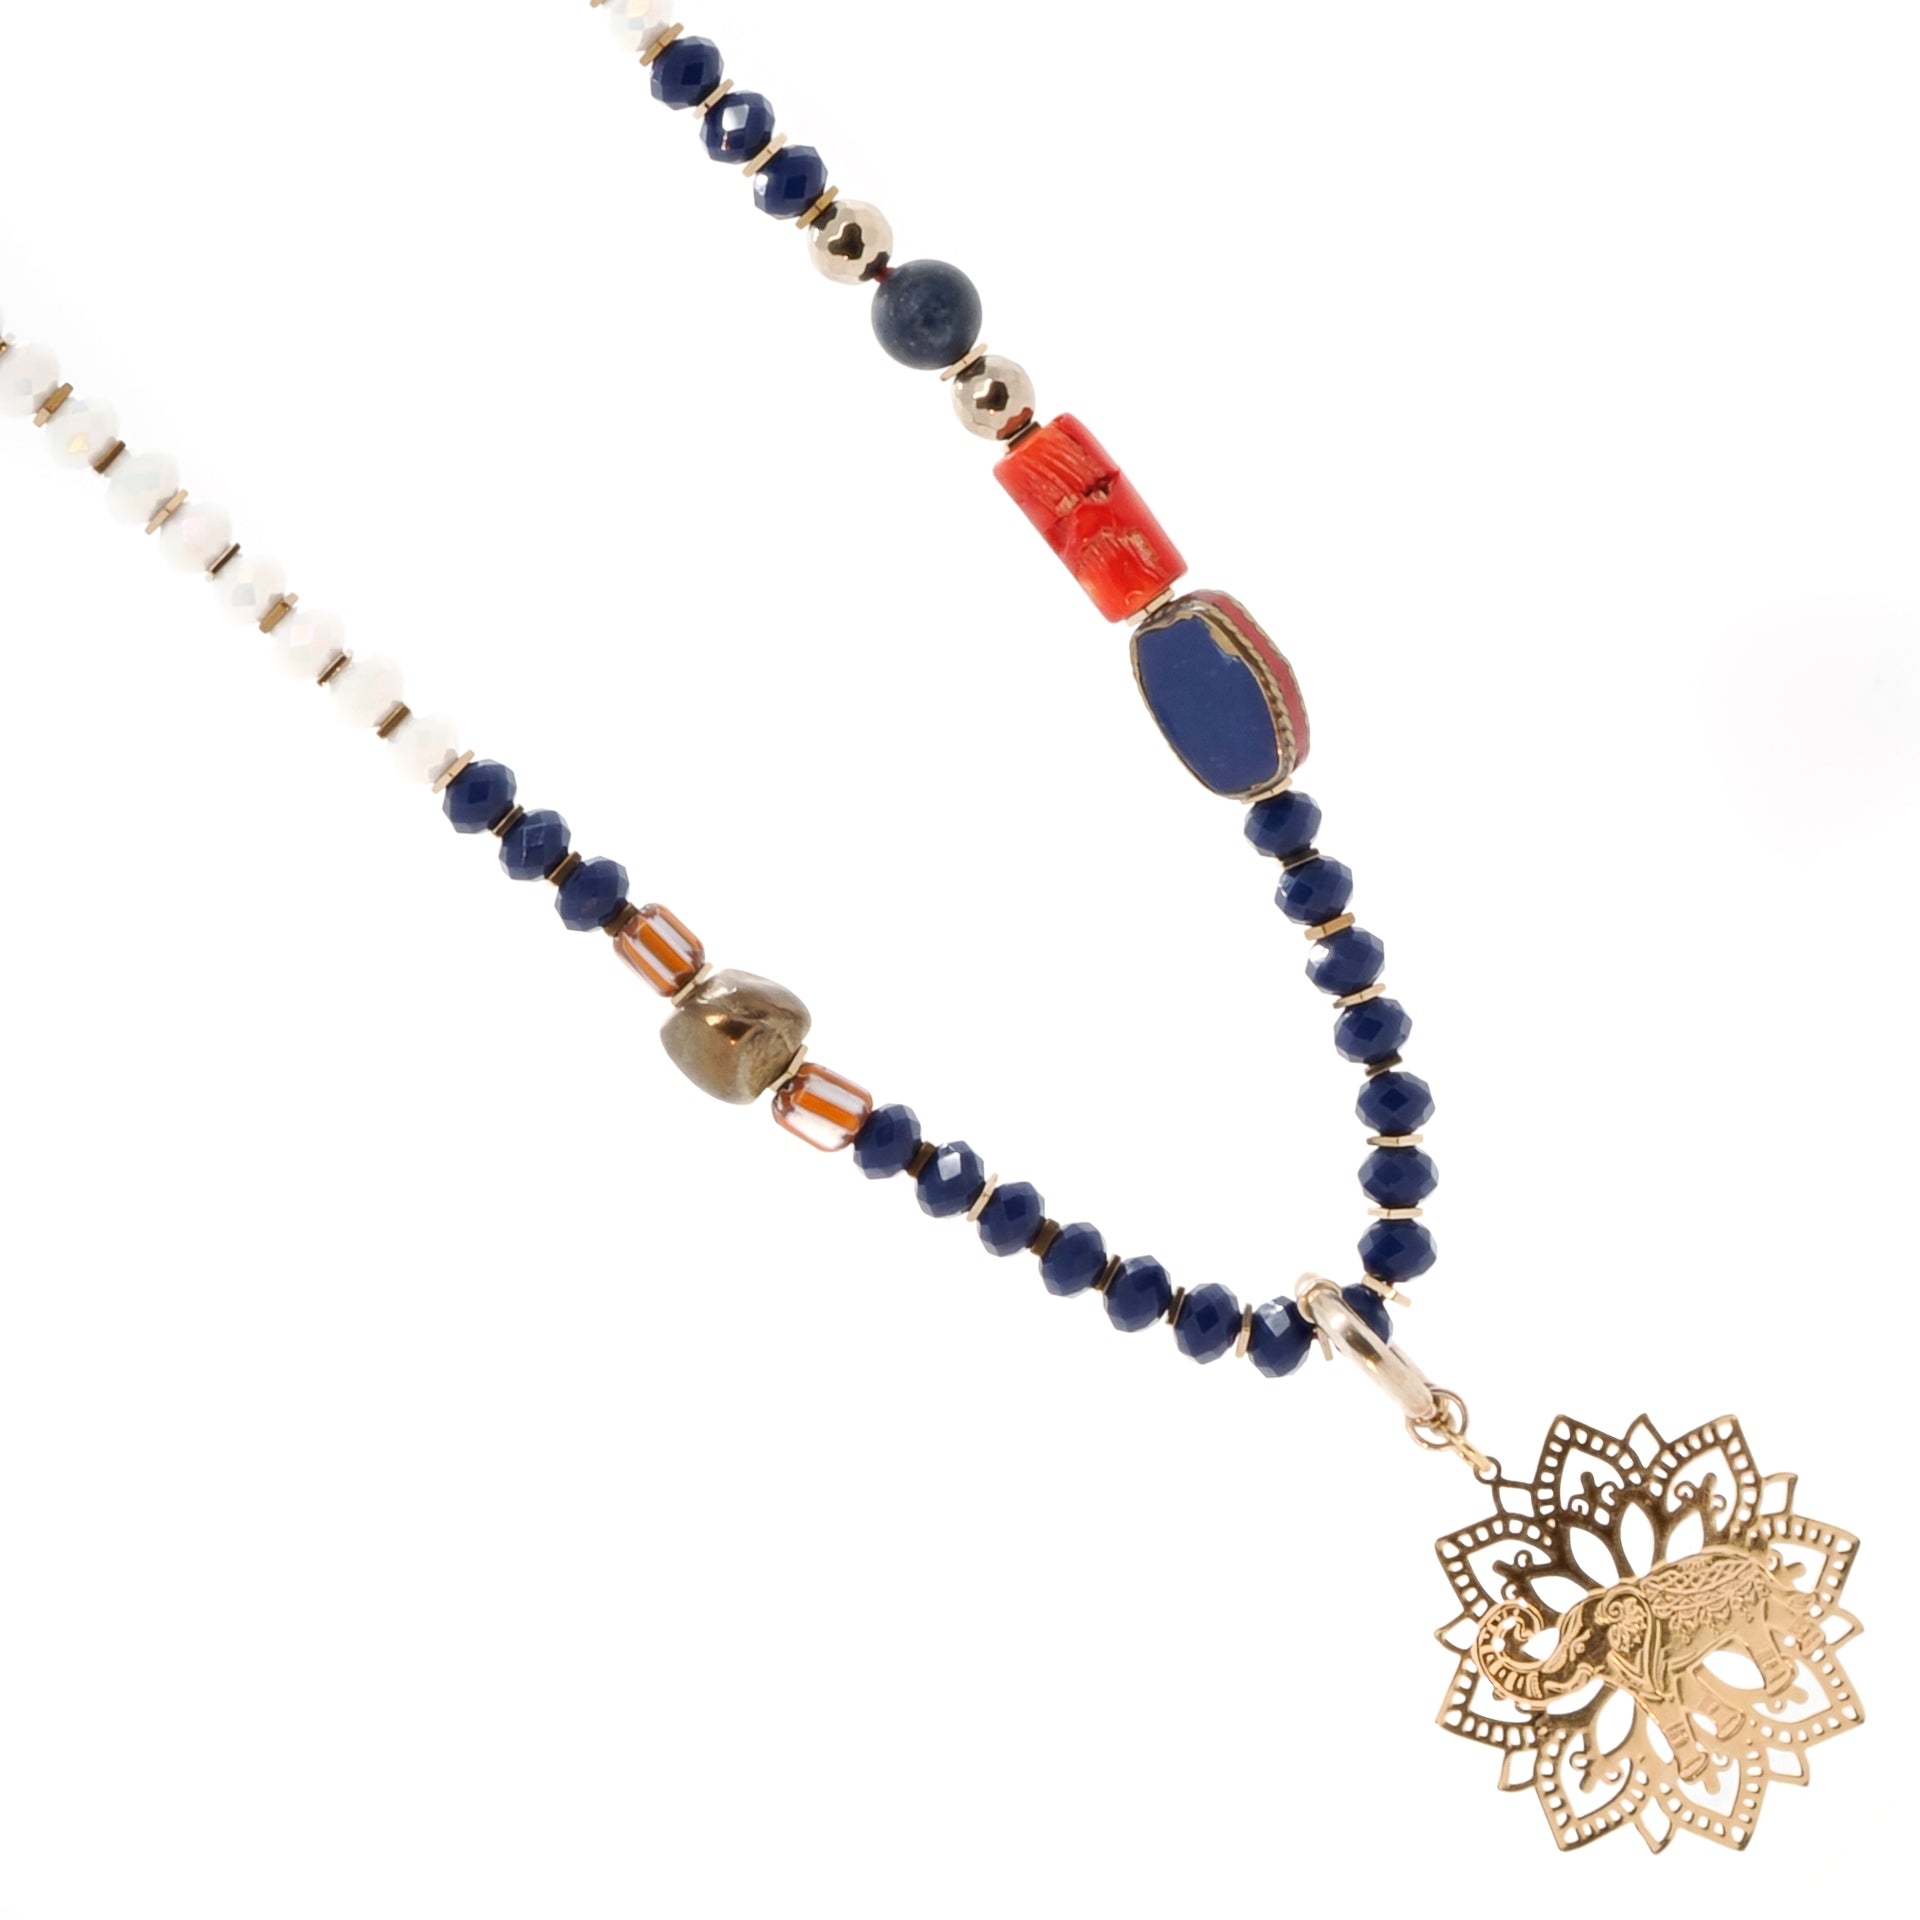 The Spiritual Elephant Necklace exudes charm and spirituality, with its unique combination of lucky elephant and butterfly charms.